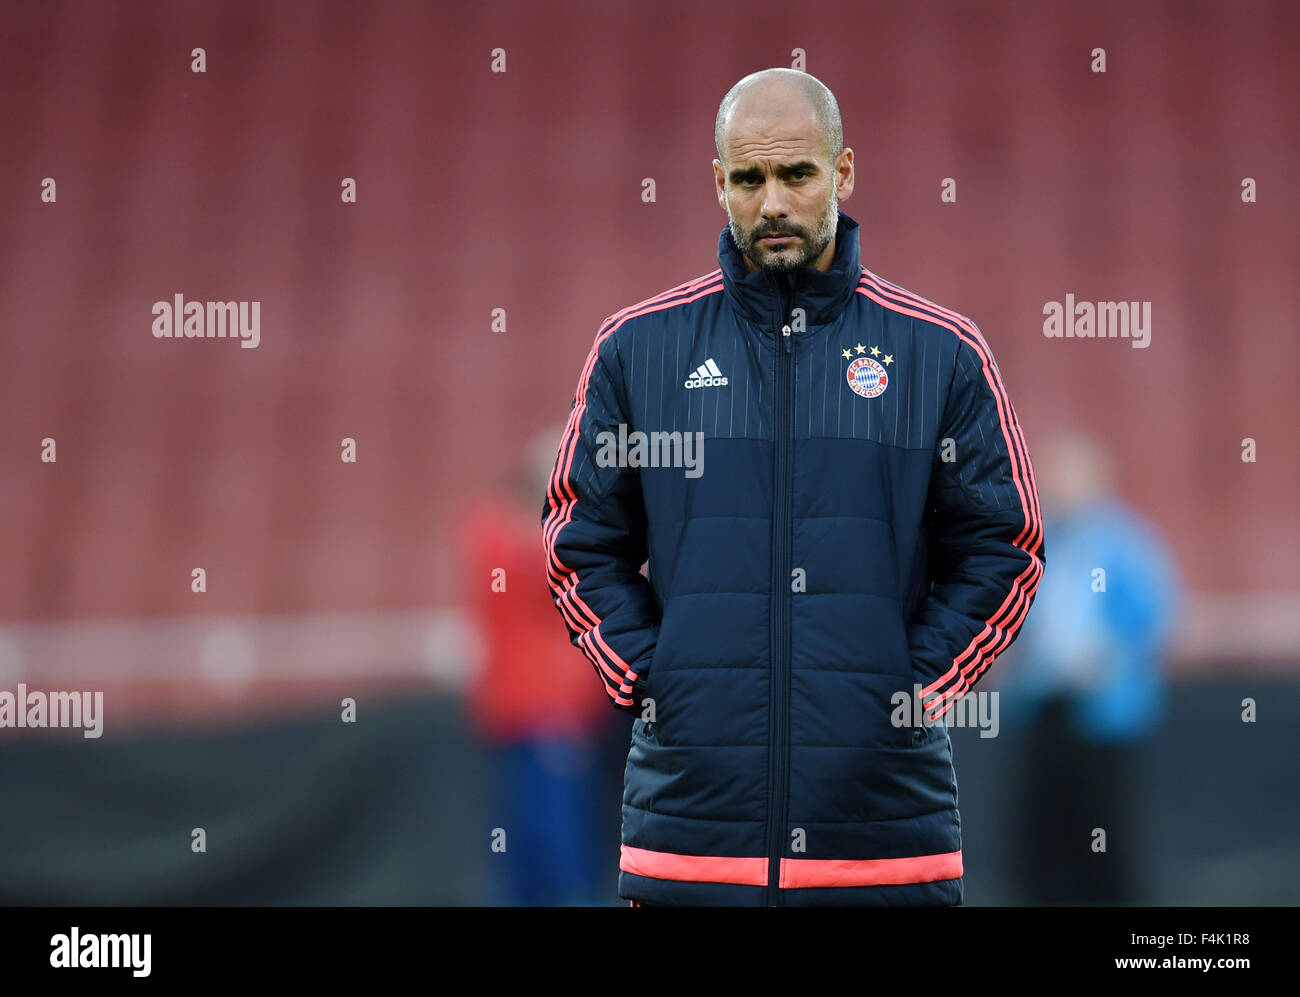 London, UK. 19th Oct, 2015. Bayern Munich coach Pep Guardiola at a training session at the Emirates Stadium in London, UK, 19 October 2015. Bayern Munich play Arsenal in the group stage of the UEFA Champions League on 20 October 2015. PHOTO: TOBIAS HASE/DPA/Alamy Live News Stock Photo